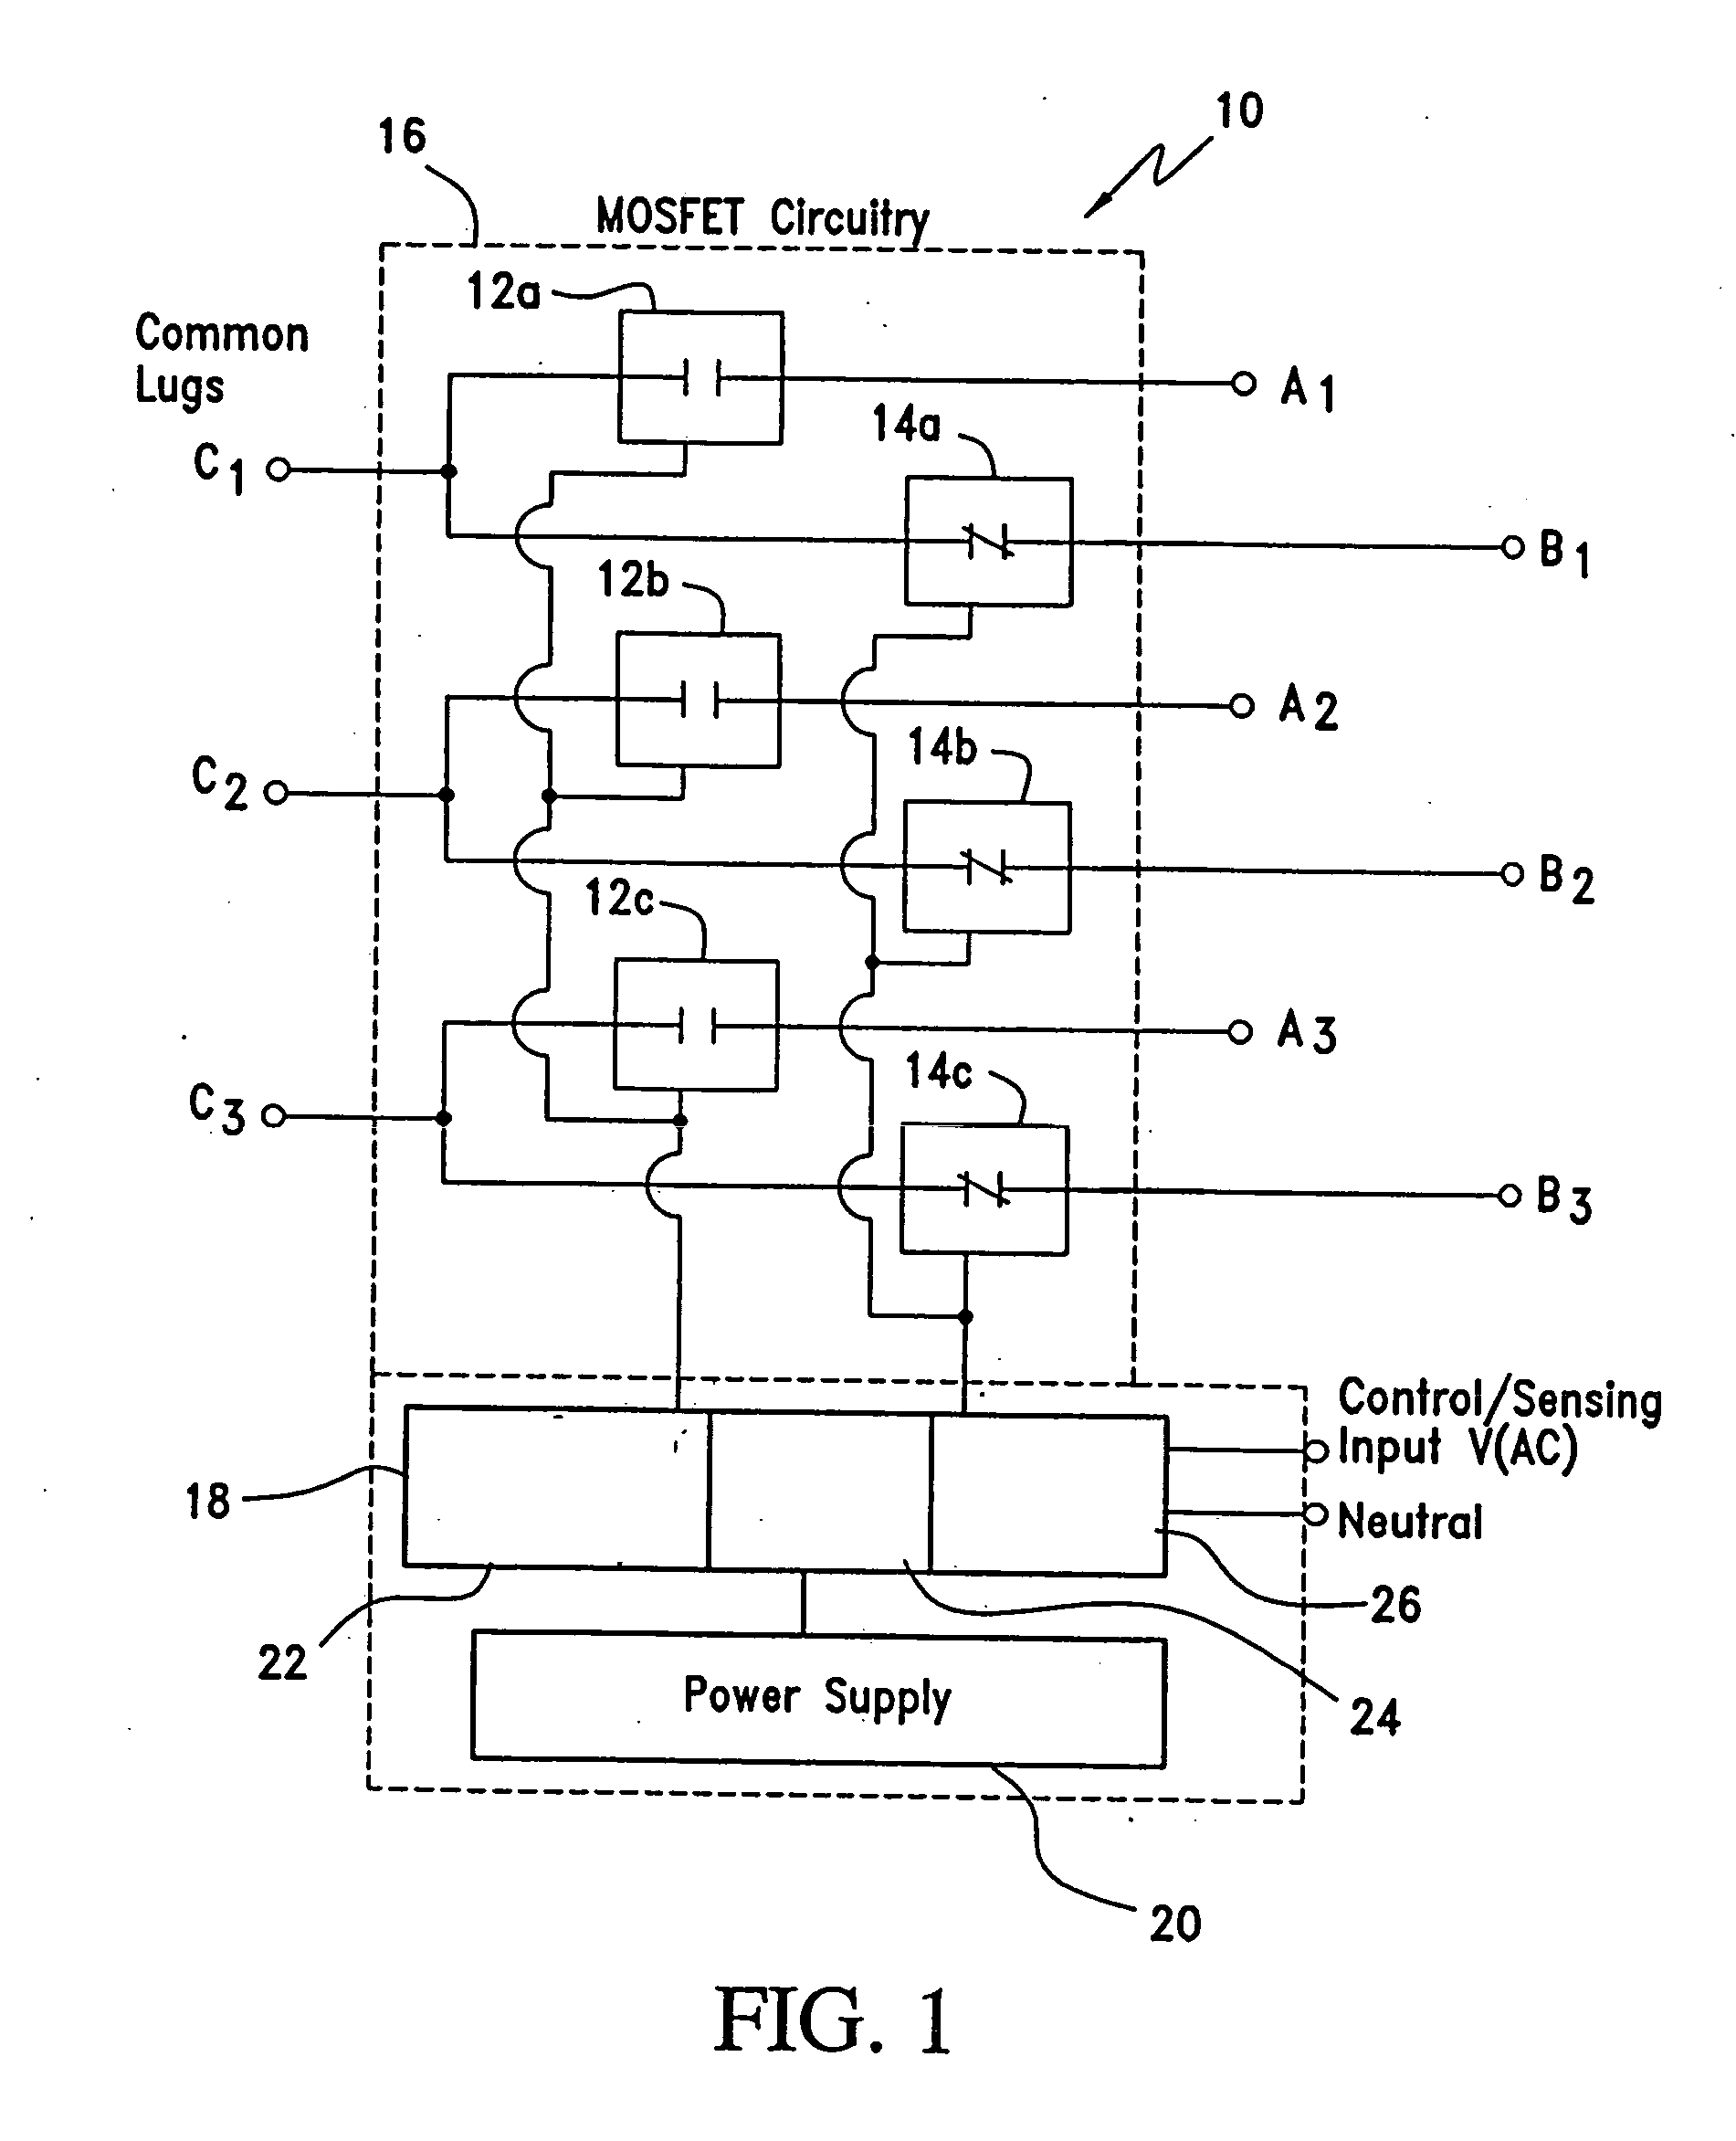 Driver system for MOSFET based, high voltage, electronic relays for AC power switching and inductive loads